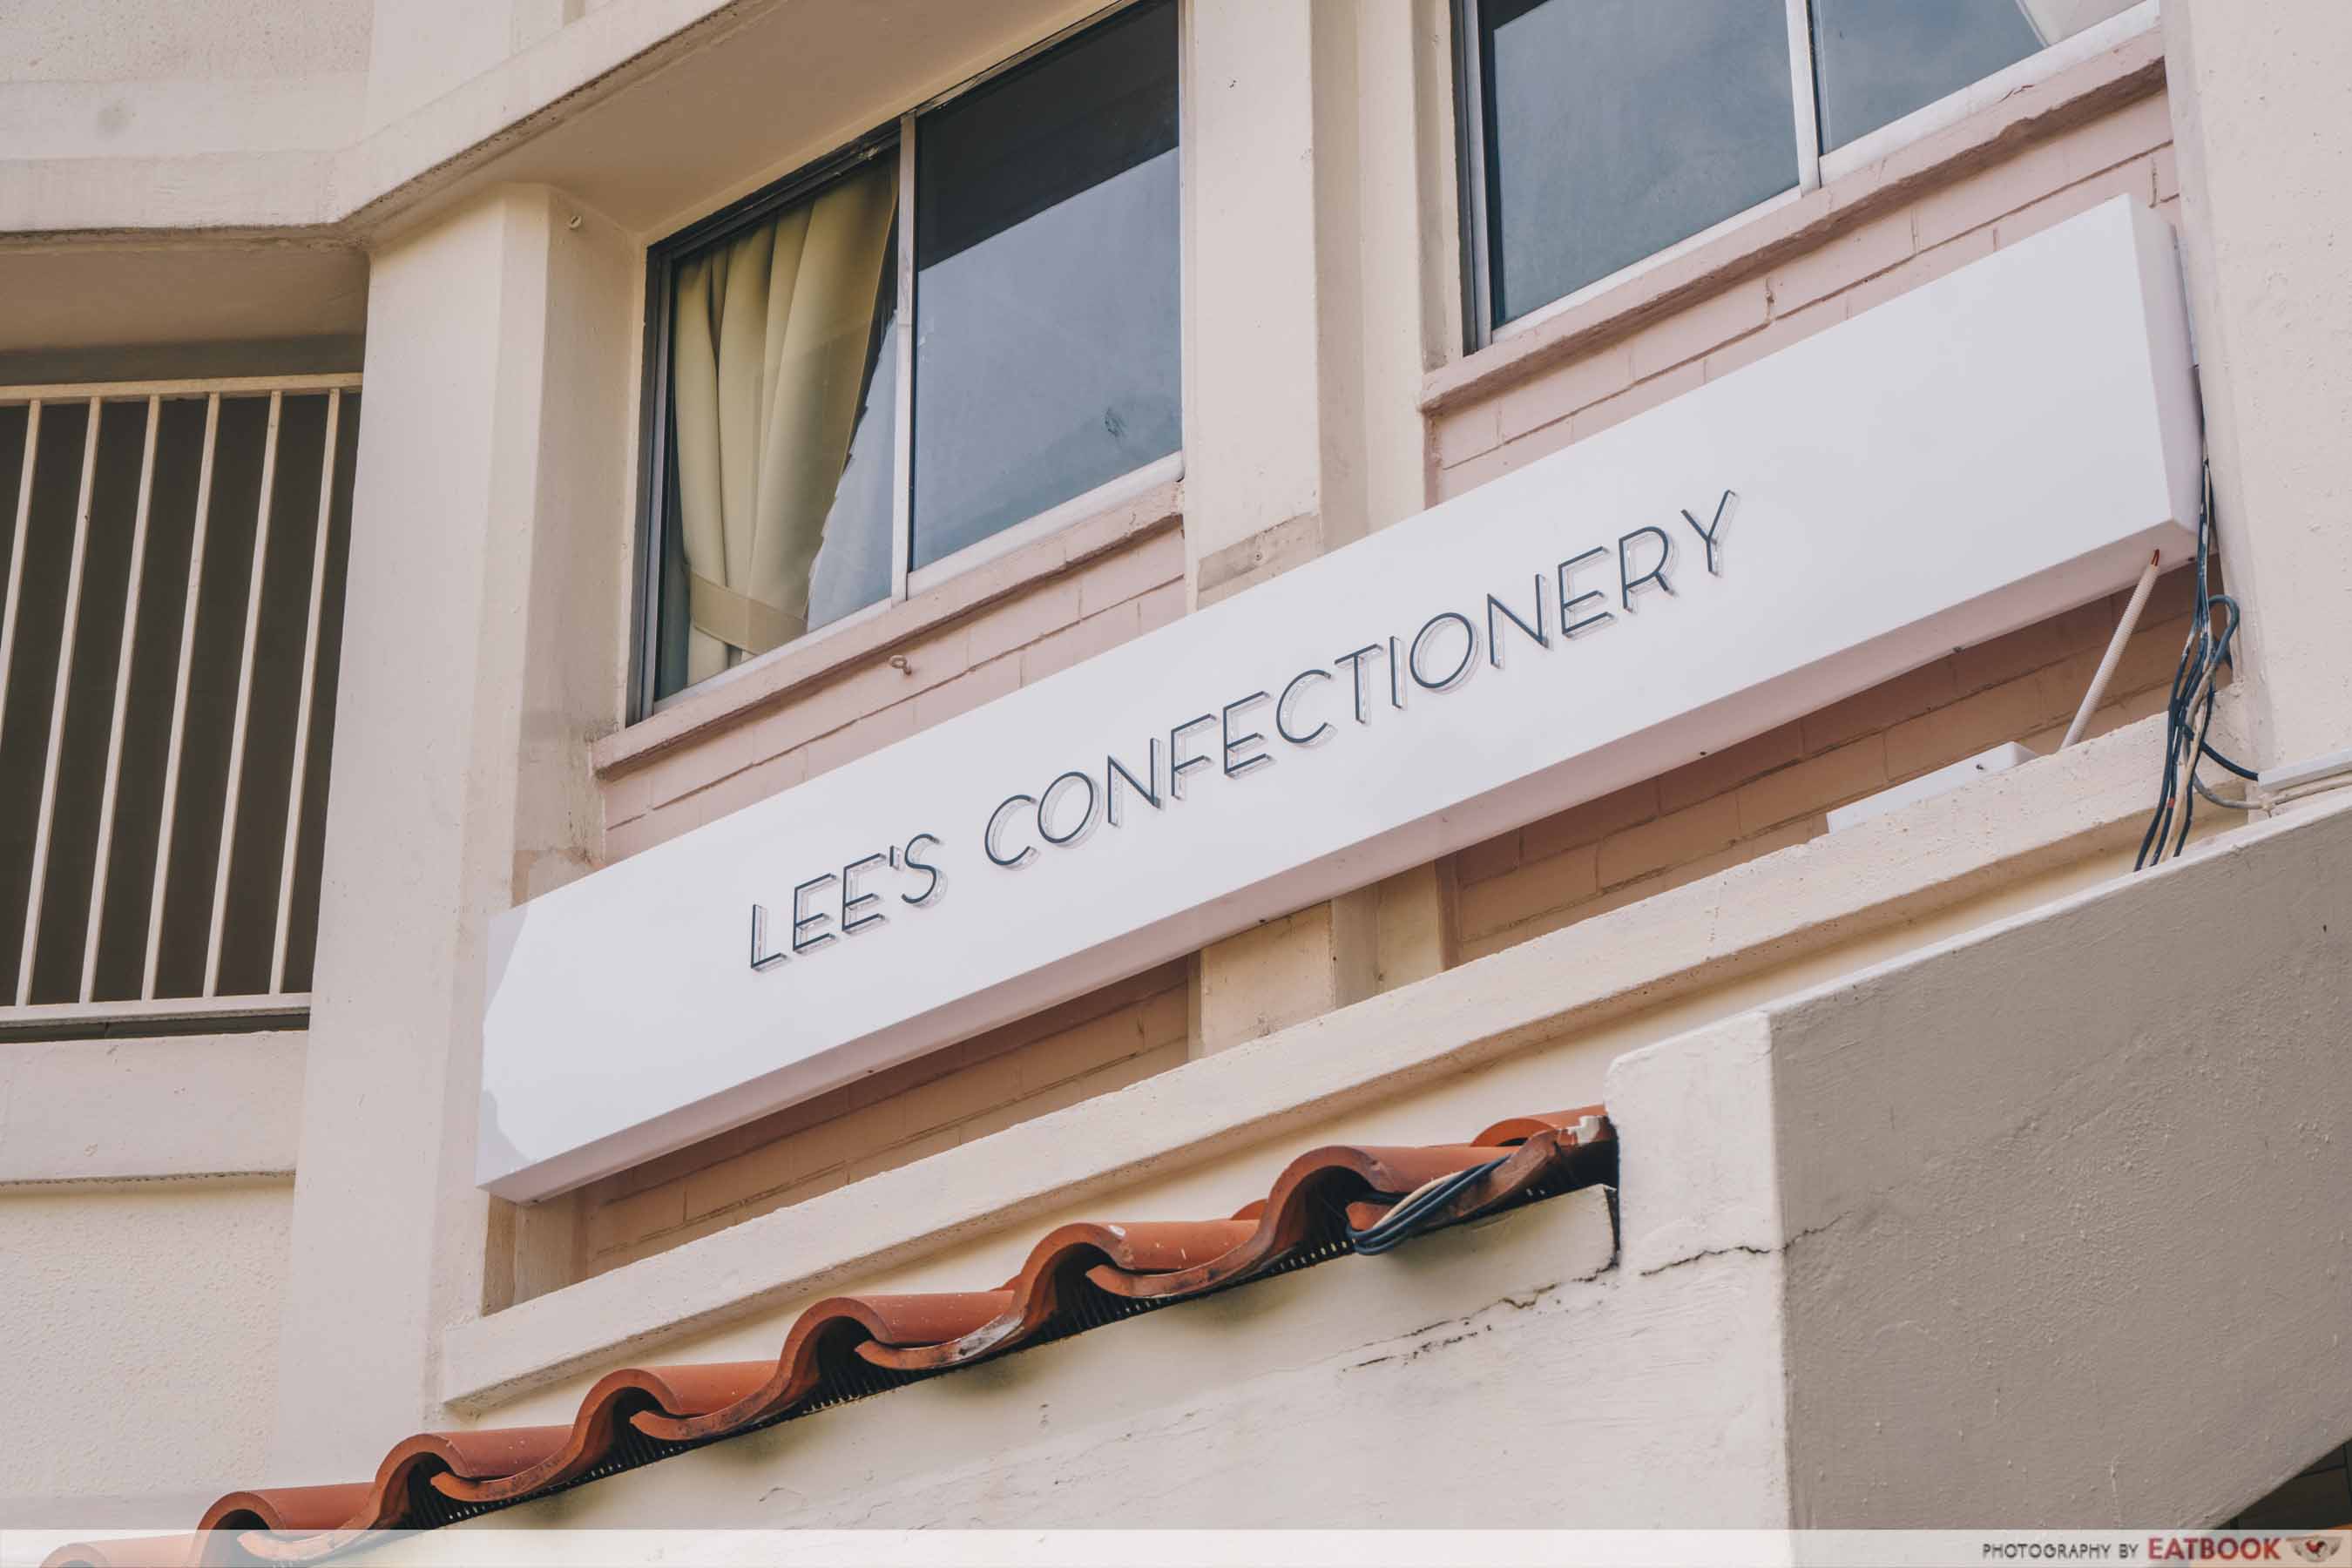 Lee's Confectionery sign